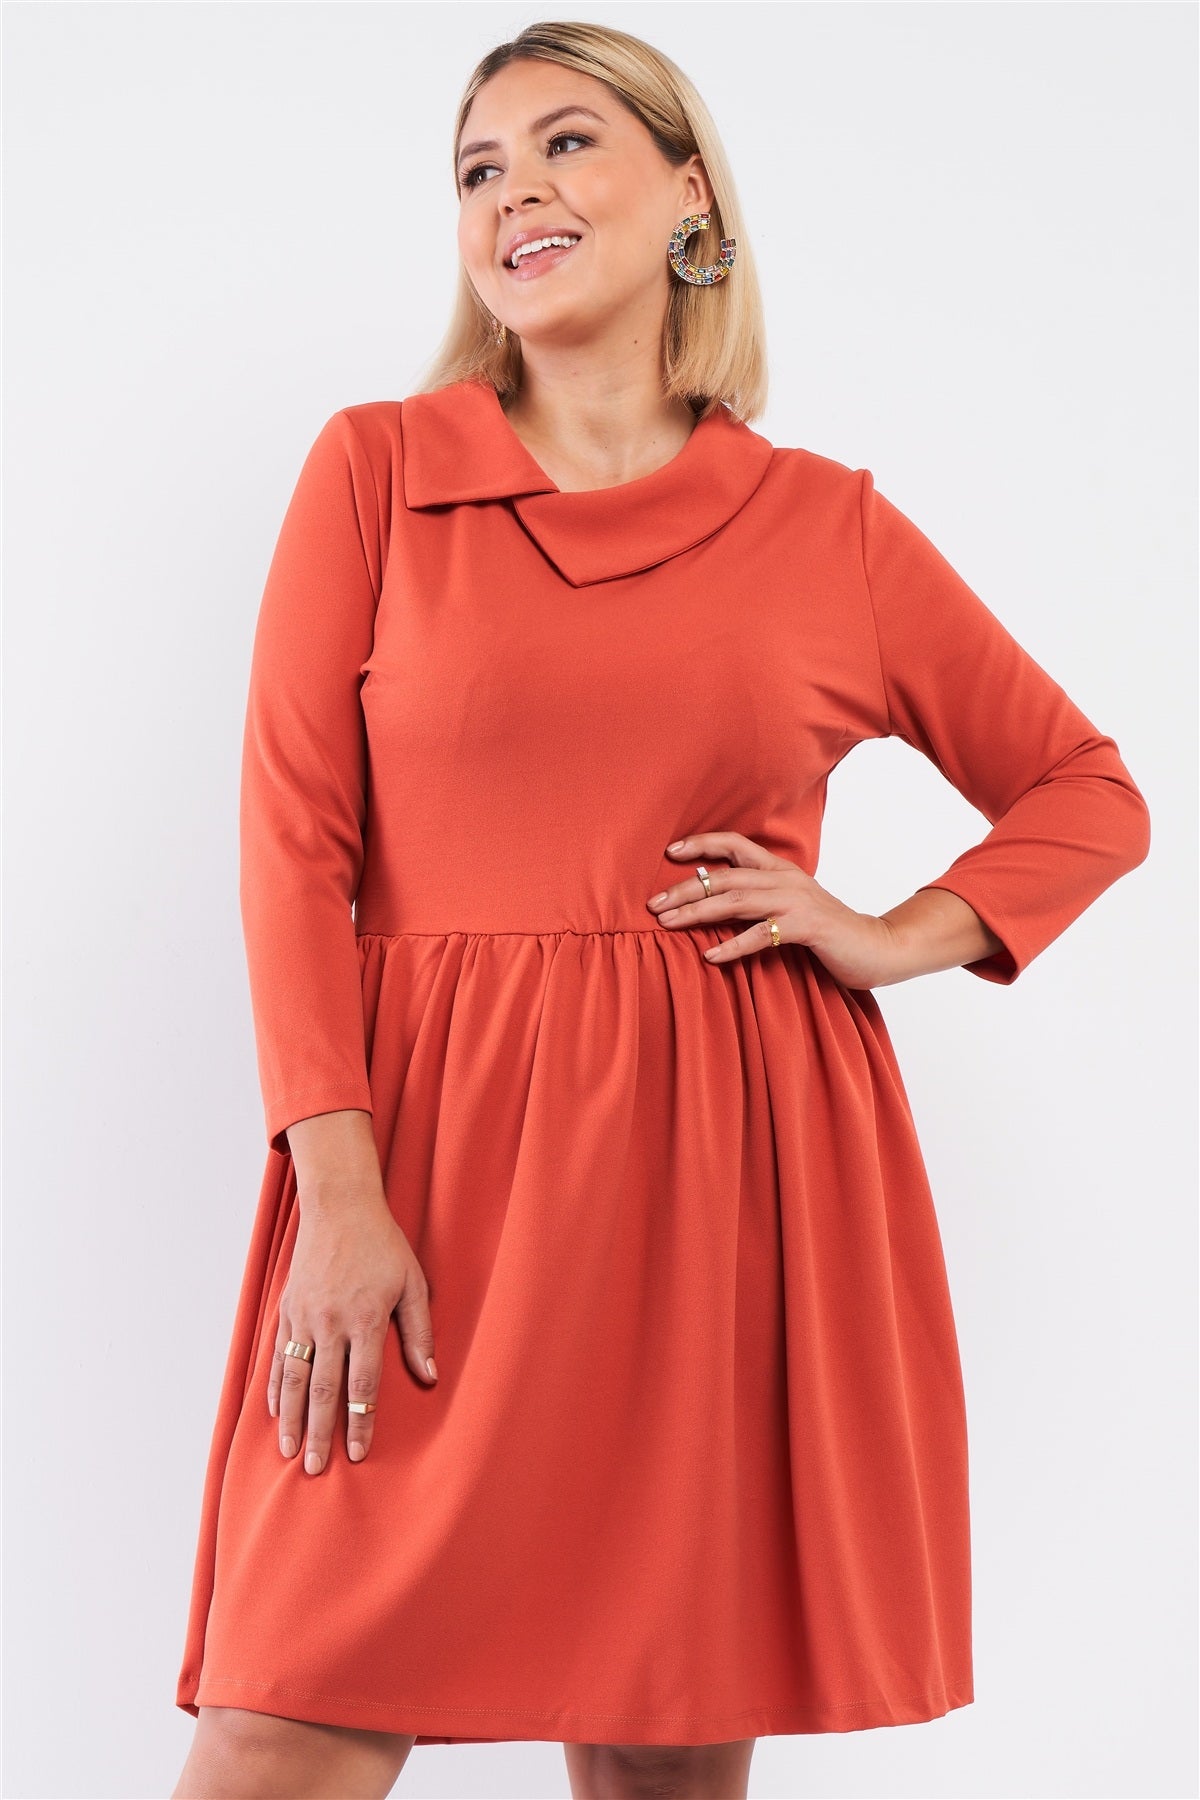 Plus Size Lovely Ladies 95% Polyester 5% Spandex Pleated Preppy Fit & Flare Long Sleeve Asymmetrical Peter Pan Collar Mini Dress (Ginger)